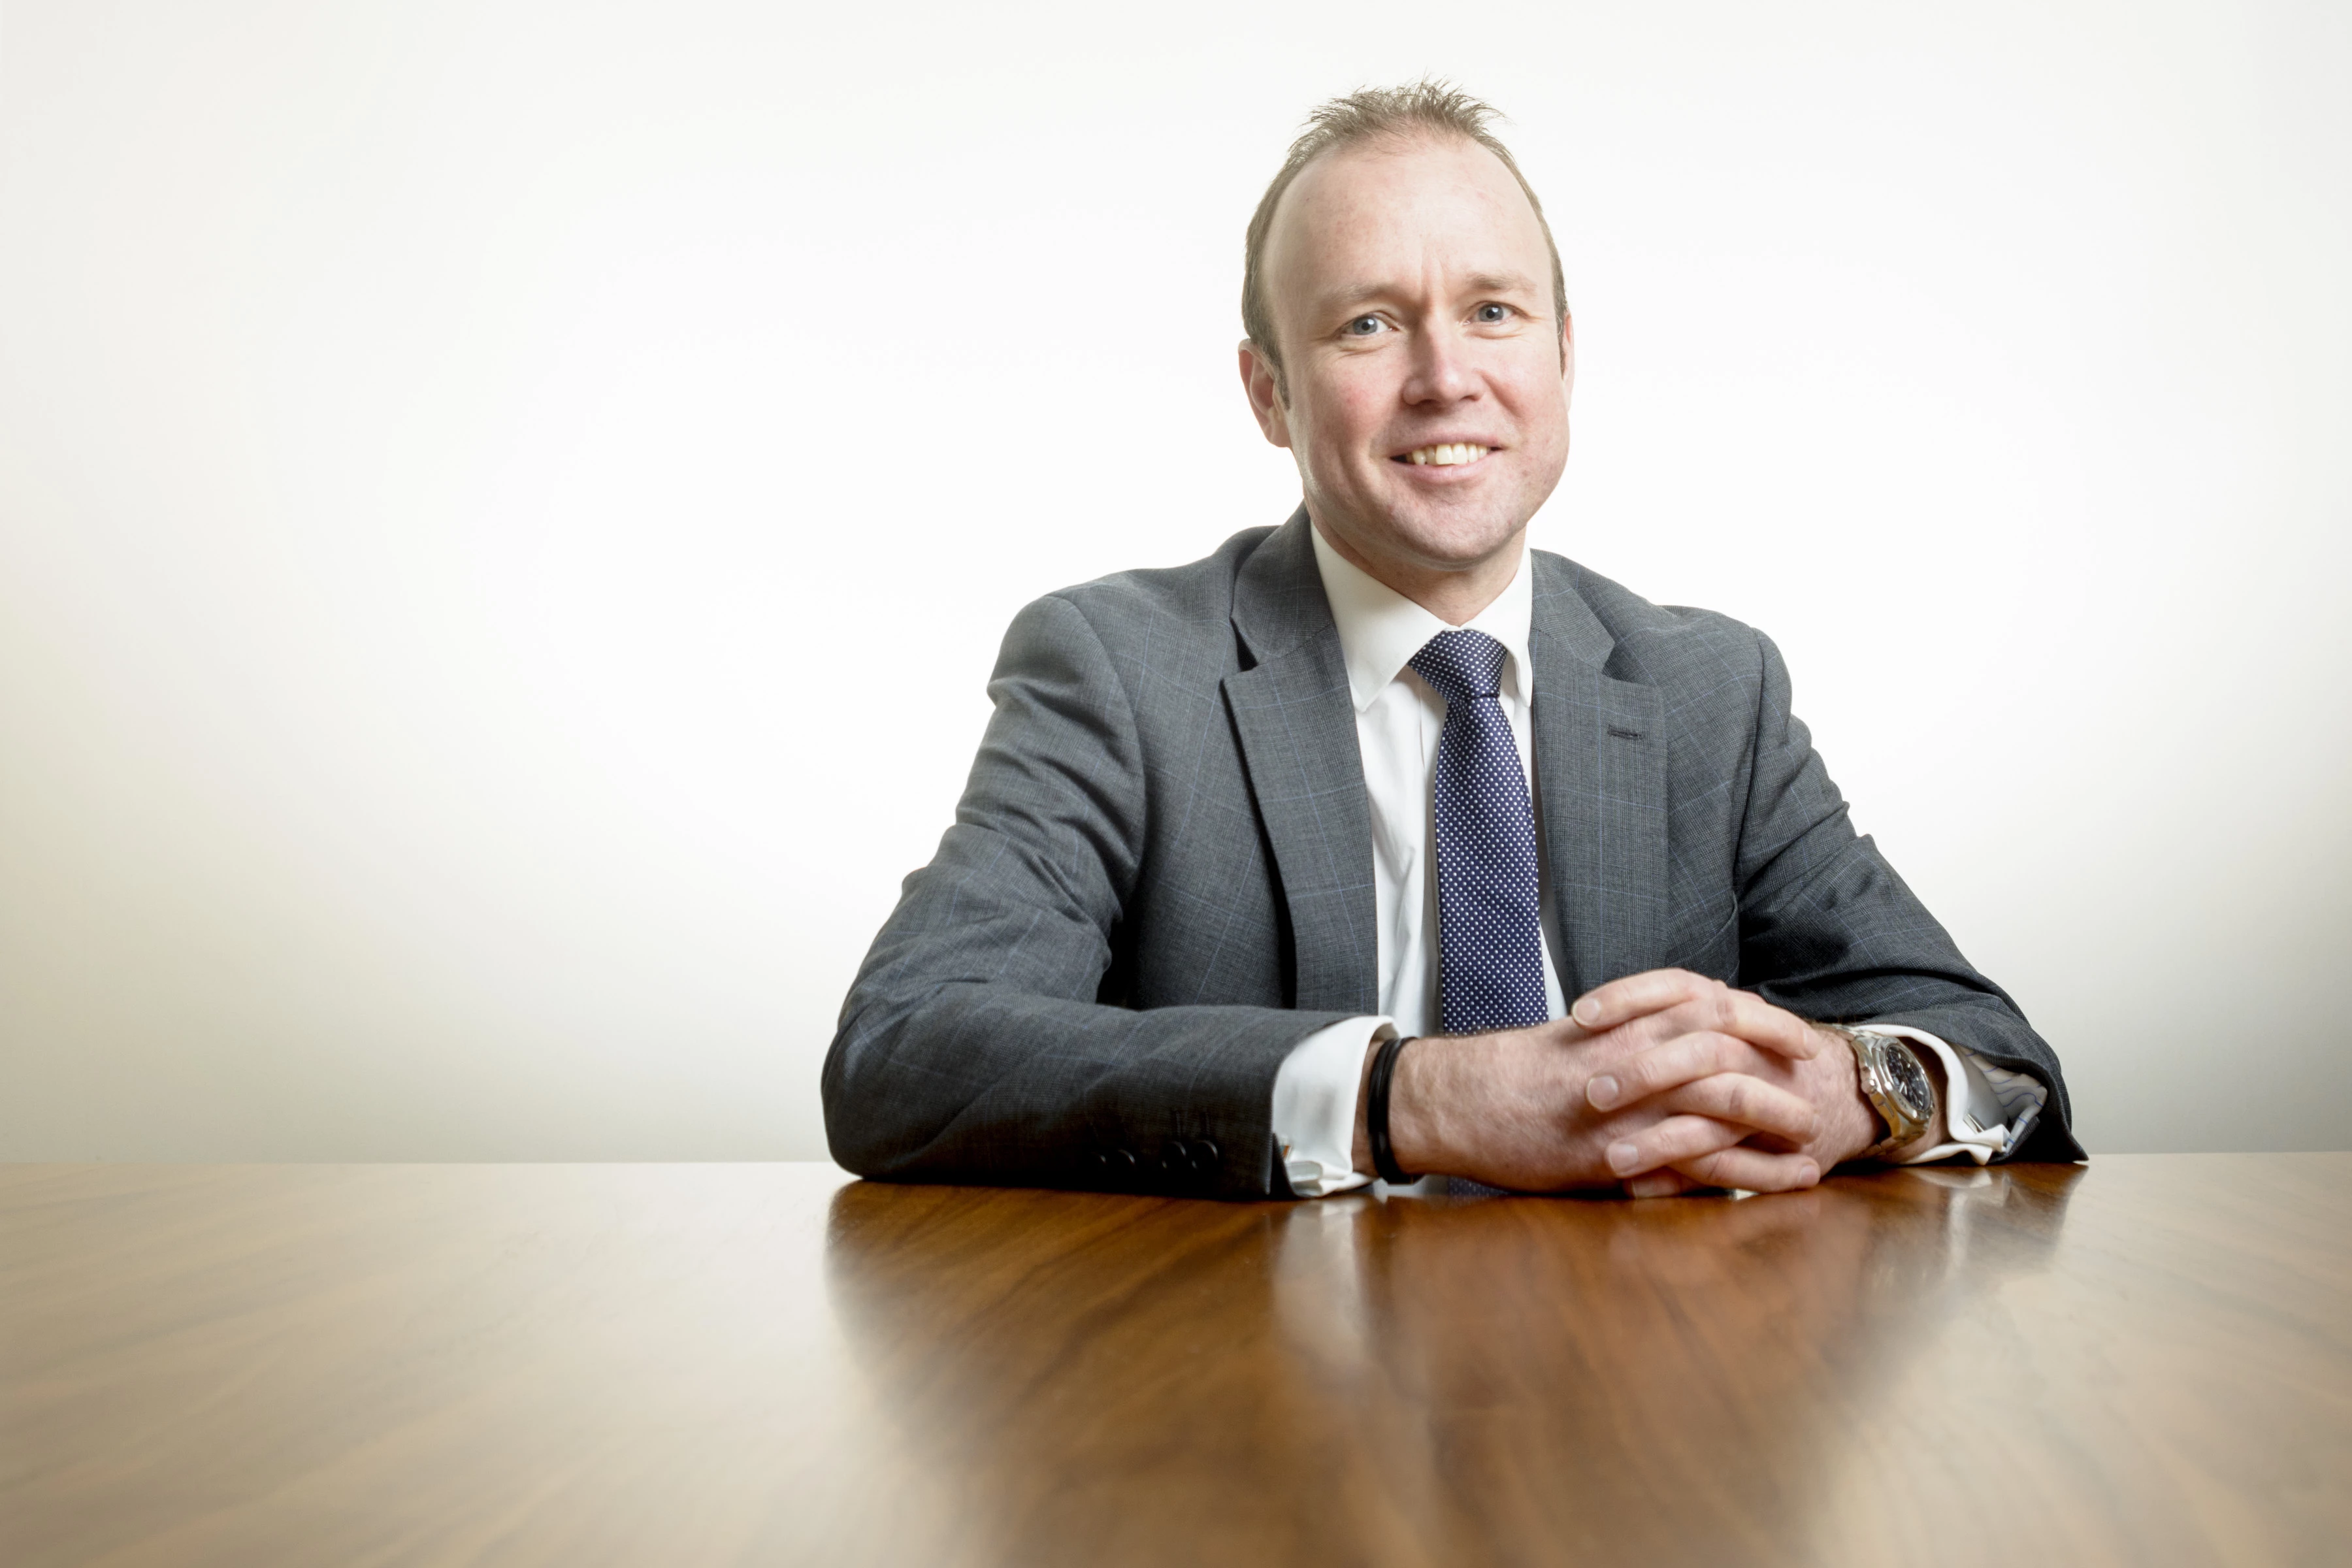 Steve Harris, regional director for the North East at Lloyds Bank Commercial Banking